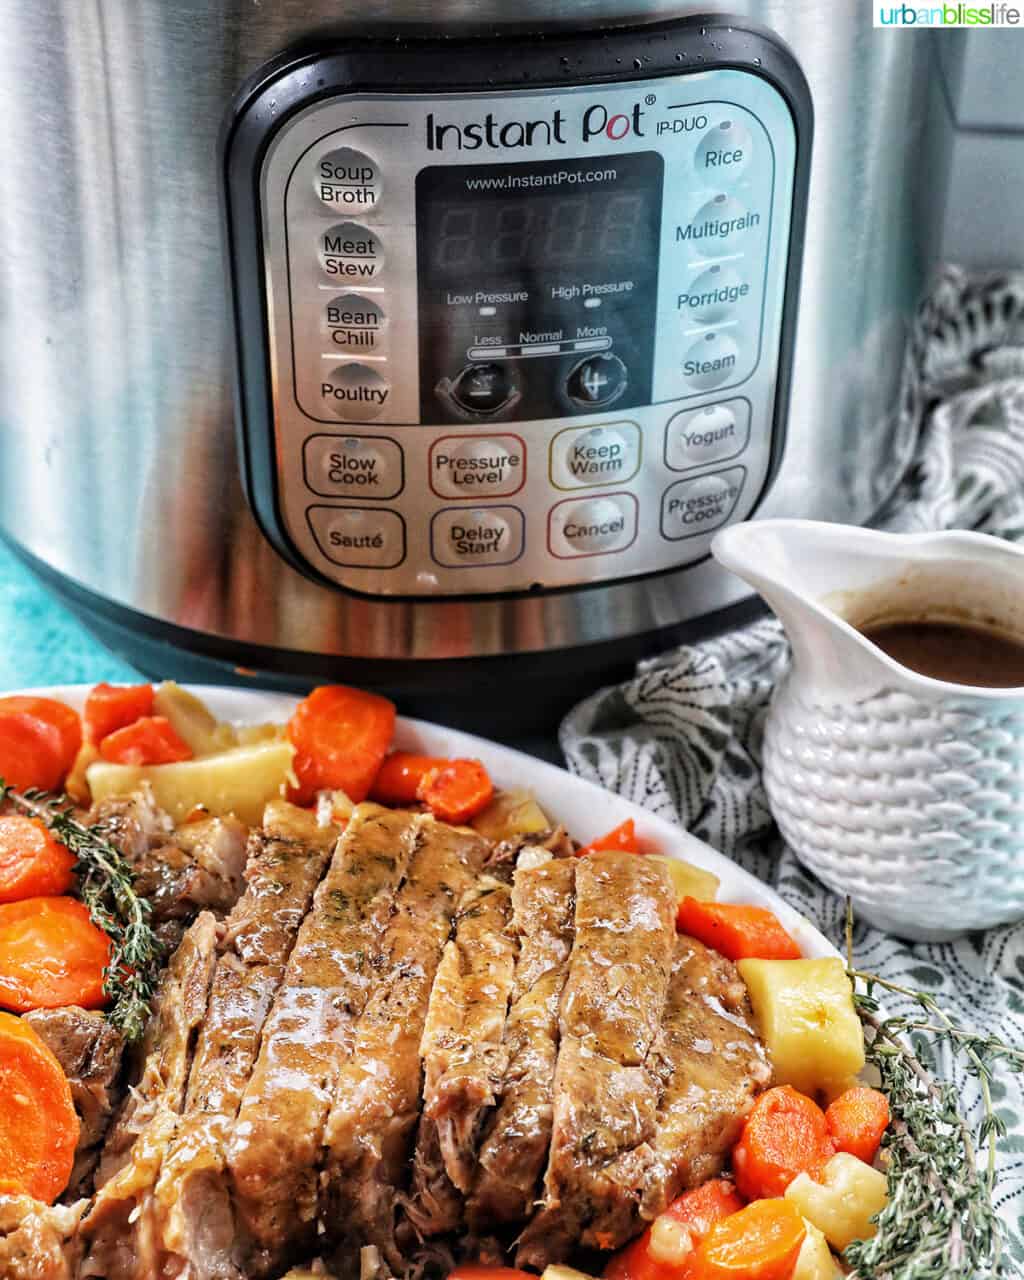 Sliced pork roast with carrots and potatoes on a plate in front of an Instant Pot and a gravy boat with gravy.